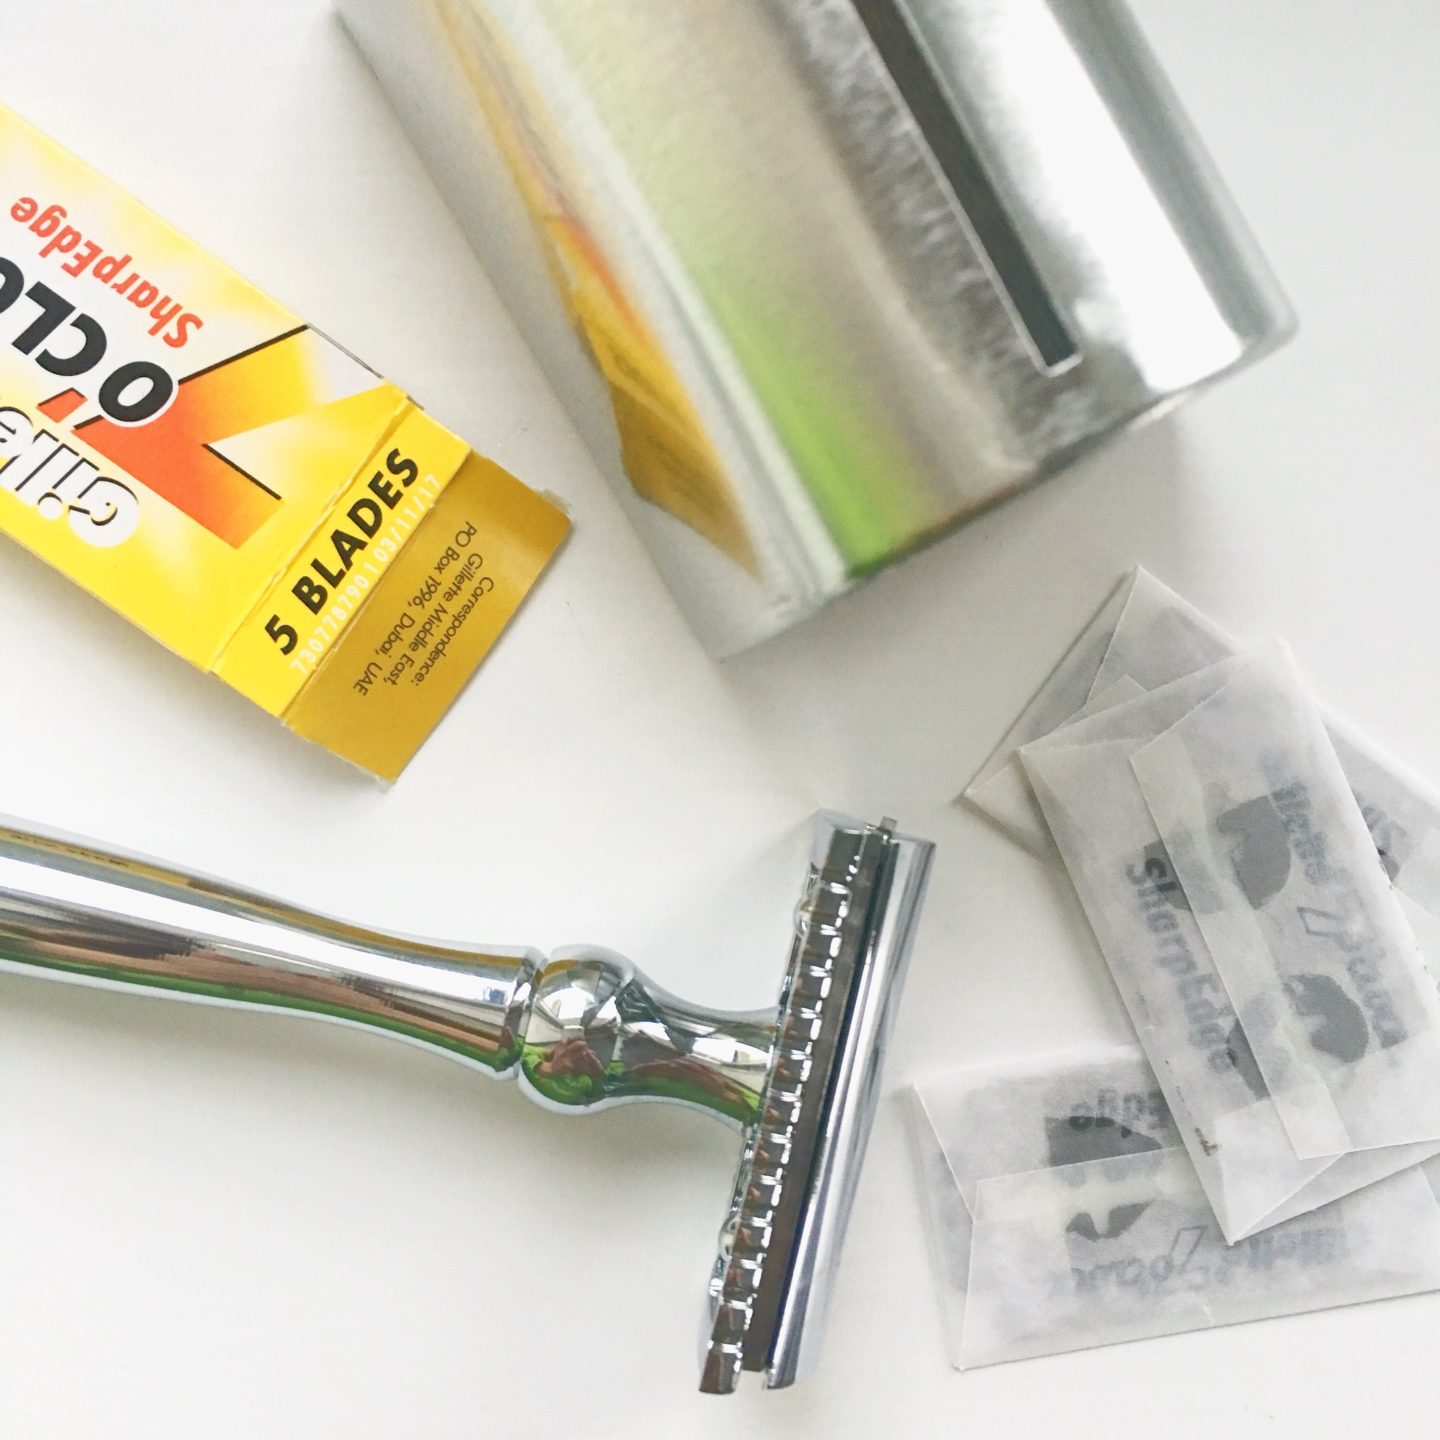 Eco Razor with Gillette Blades and Blade disposal tin bin